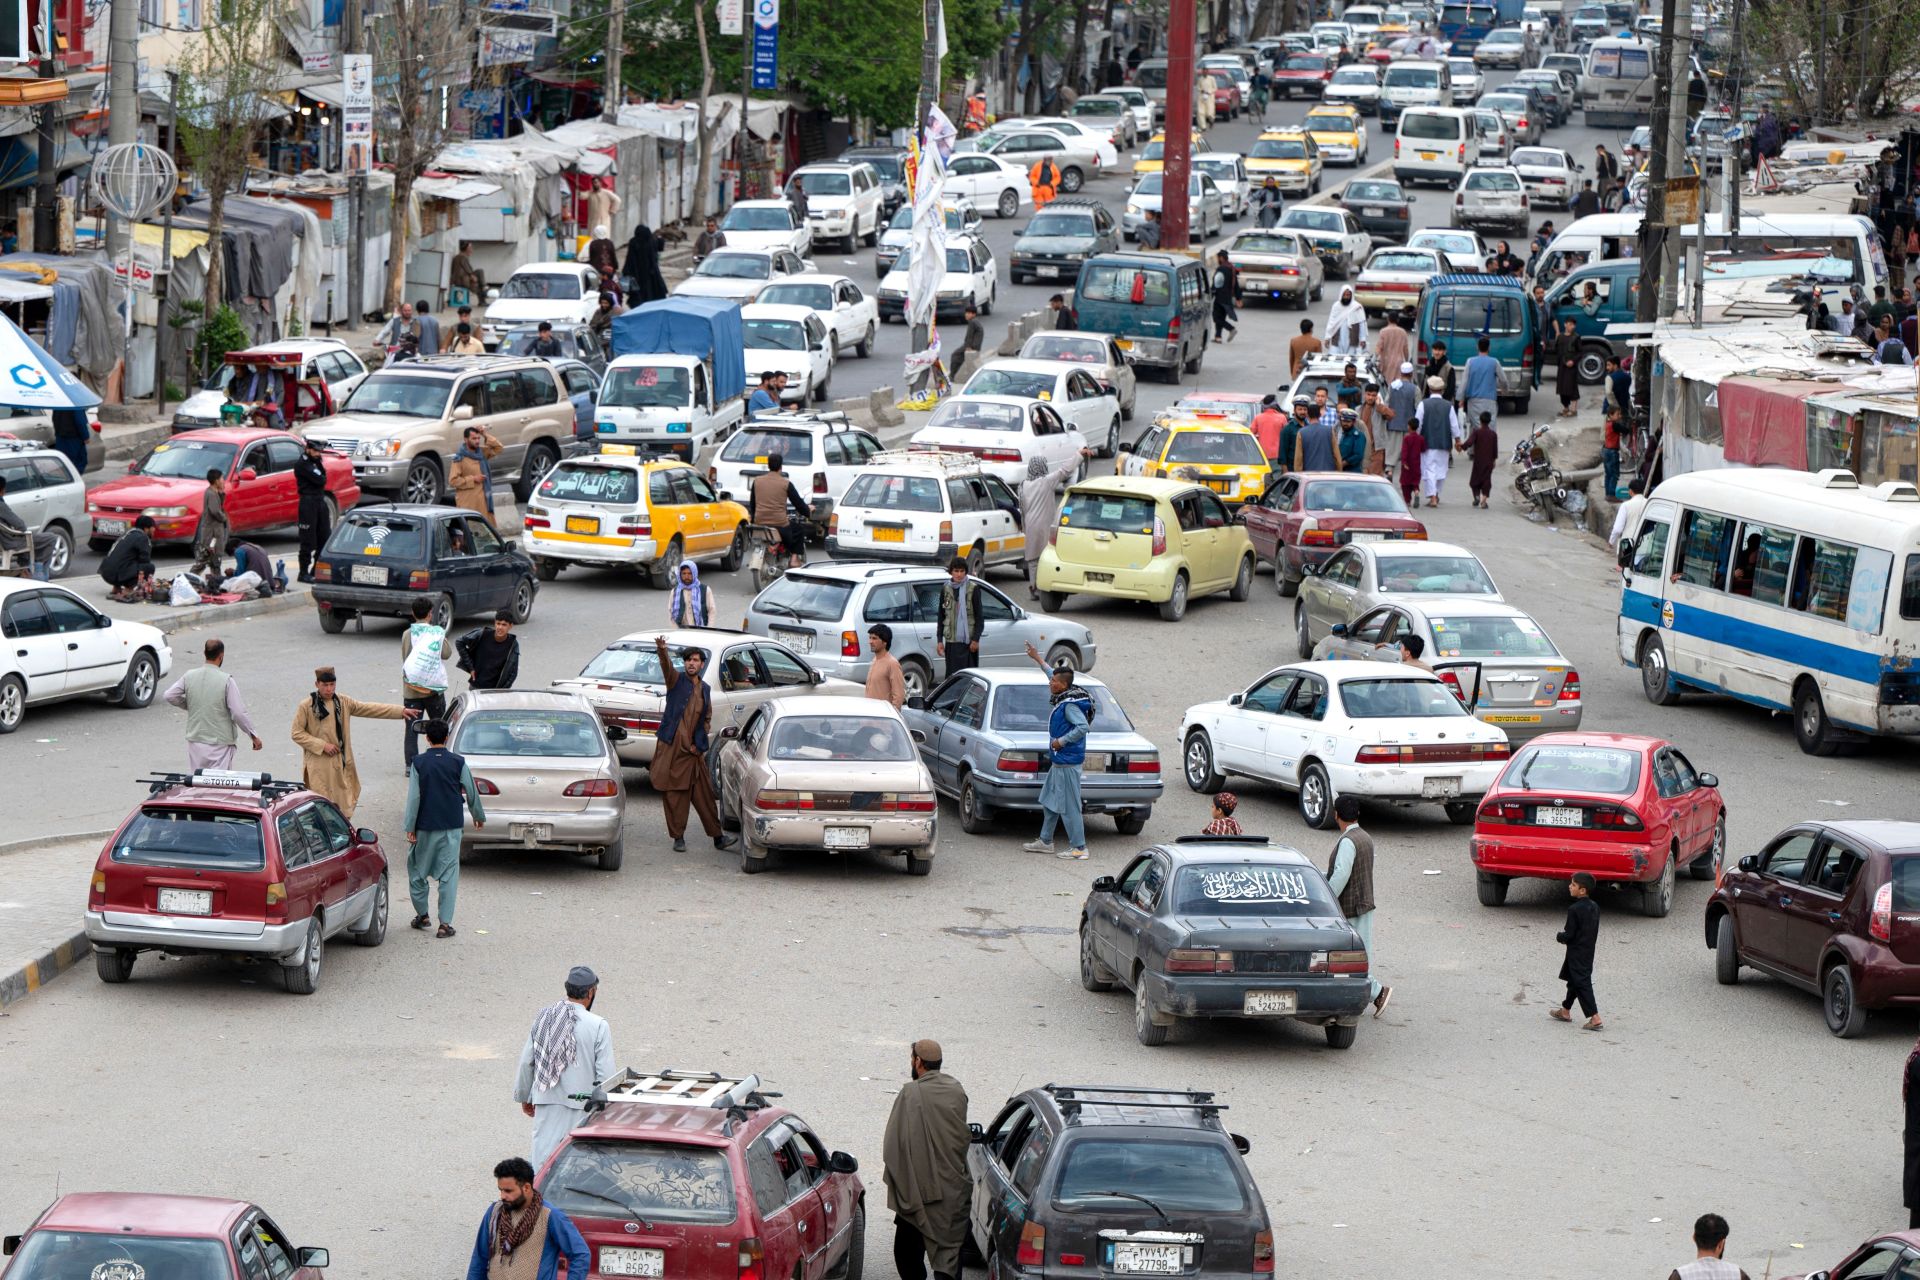 In Afghanistan’s Taxi Industry, the Taliban Show How They Govern